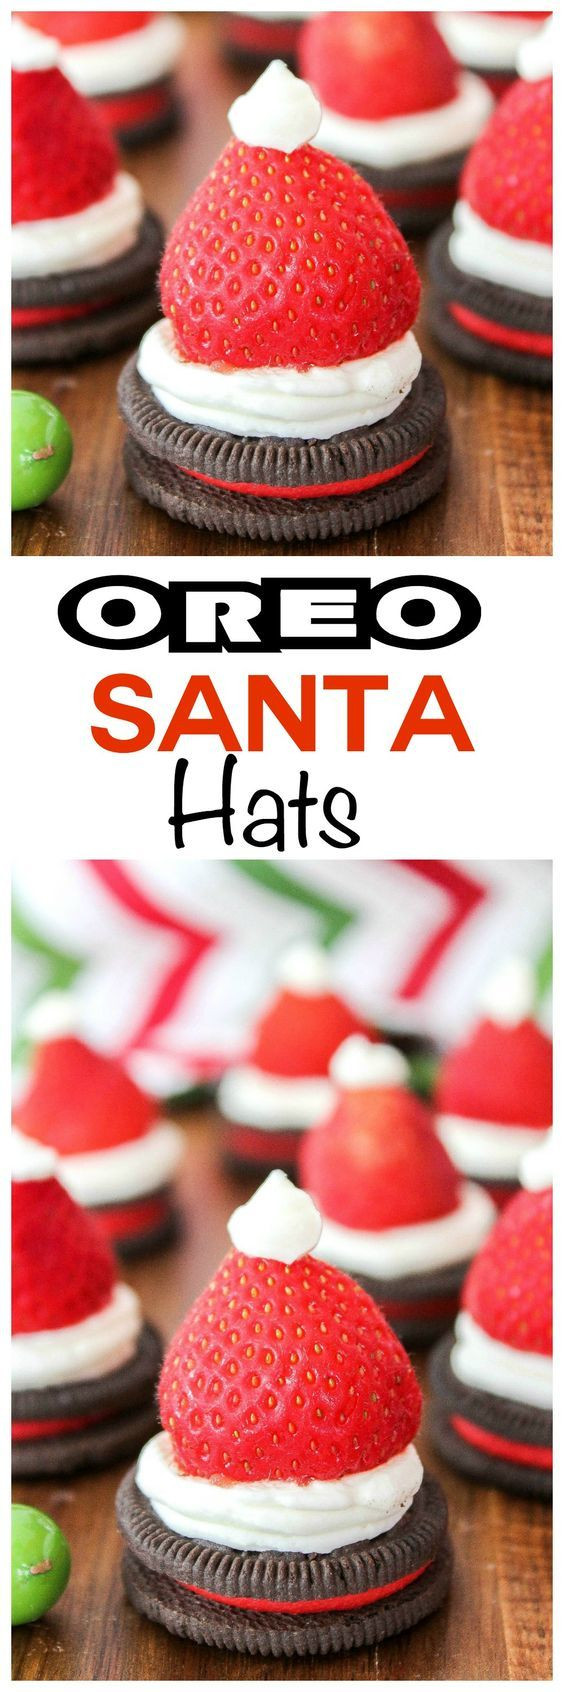 Christmas Baking For Kids
 Looking for treats for santa These oreo santa hats are